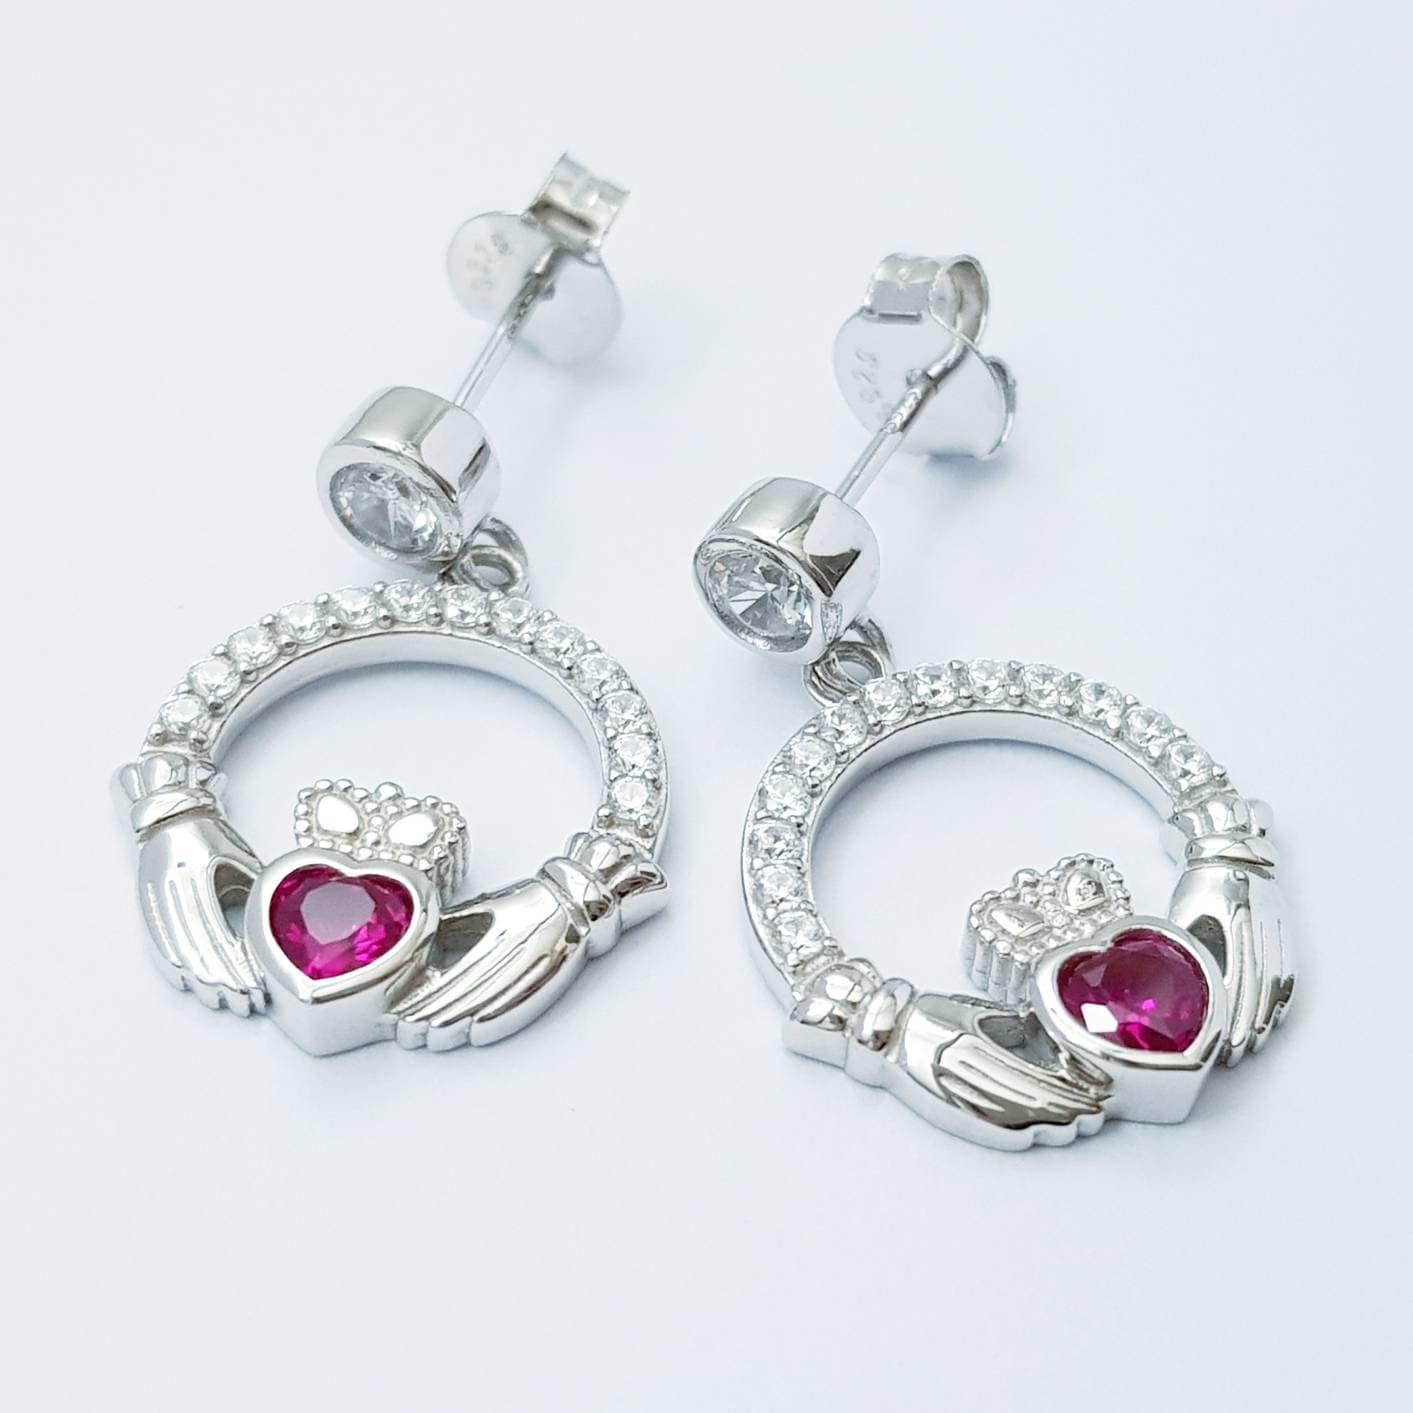 Silver claddagh drop earrings with red stone heart, July birthstone